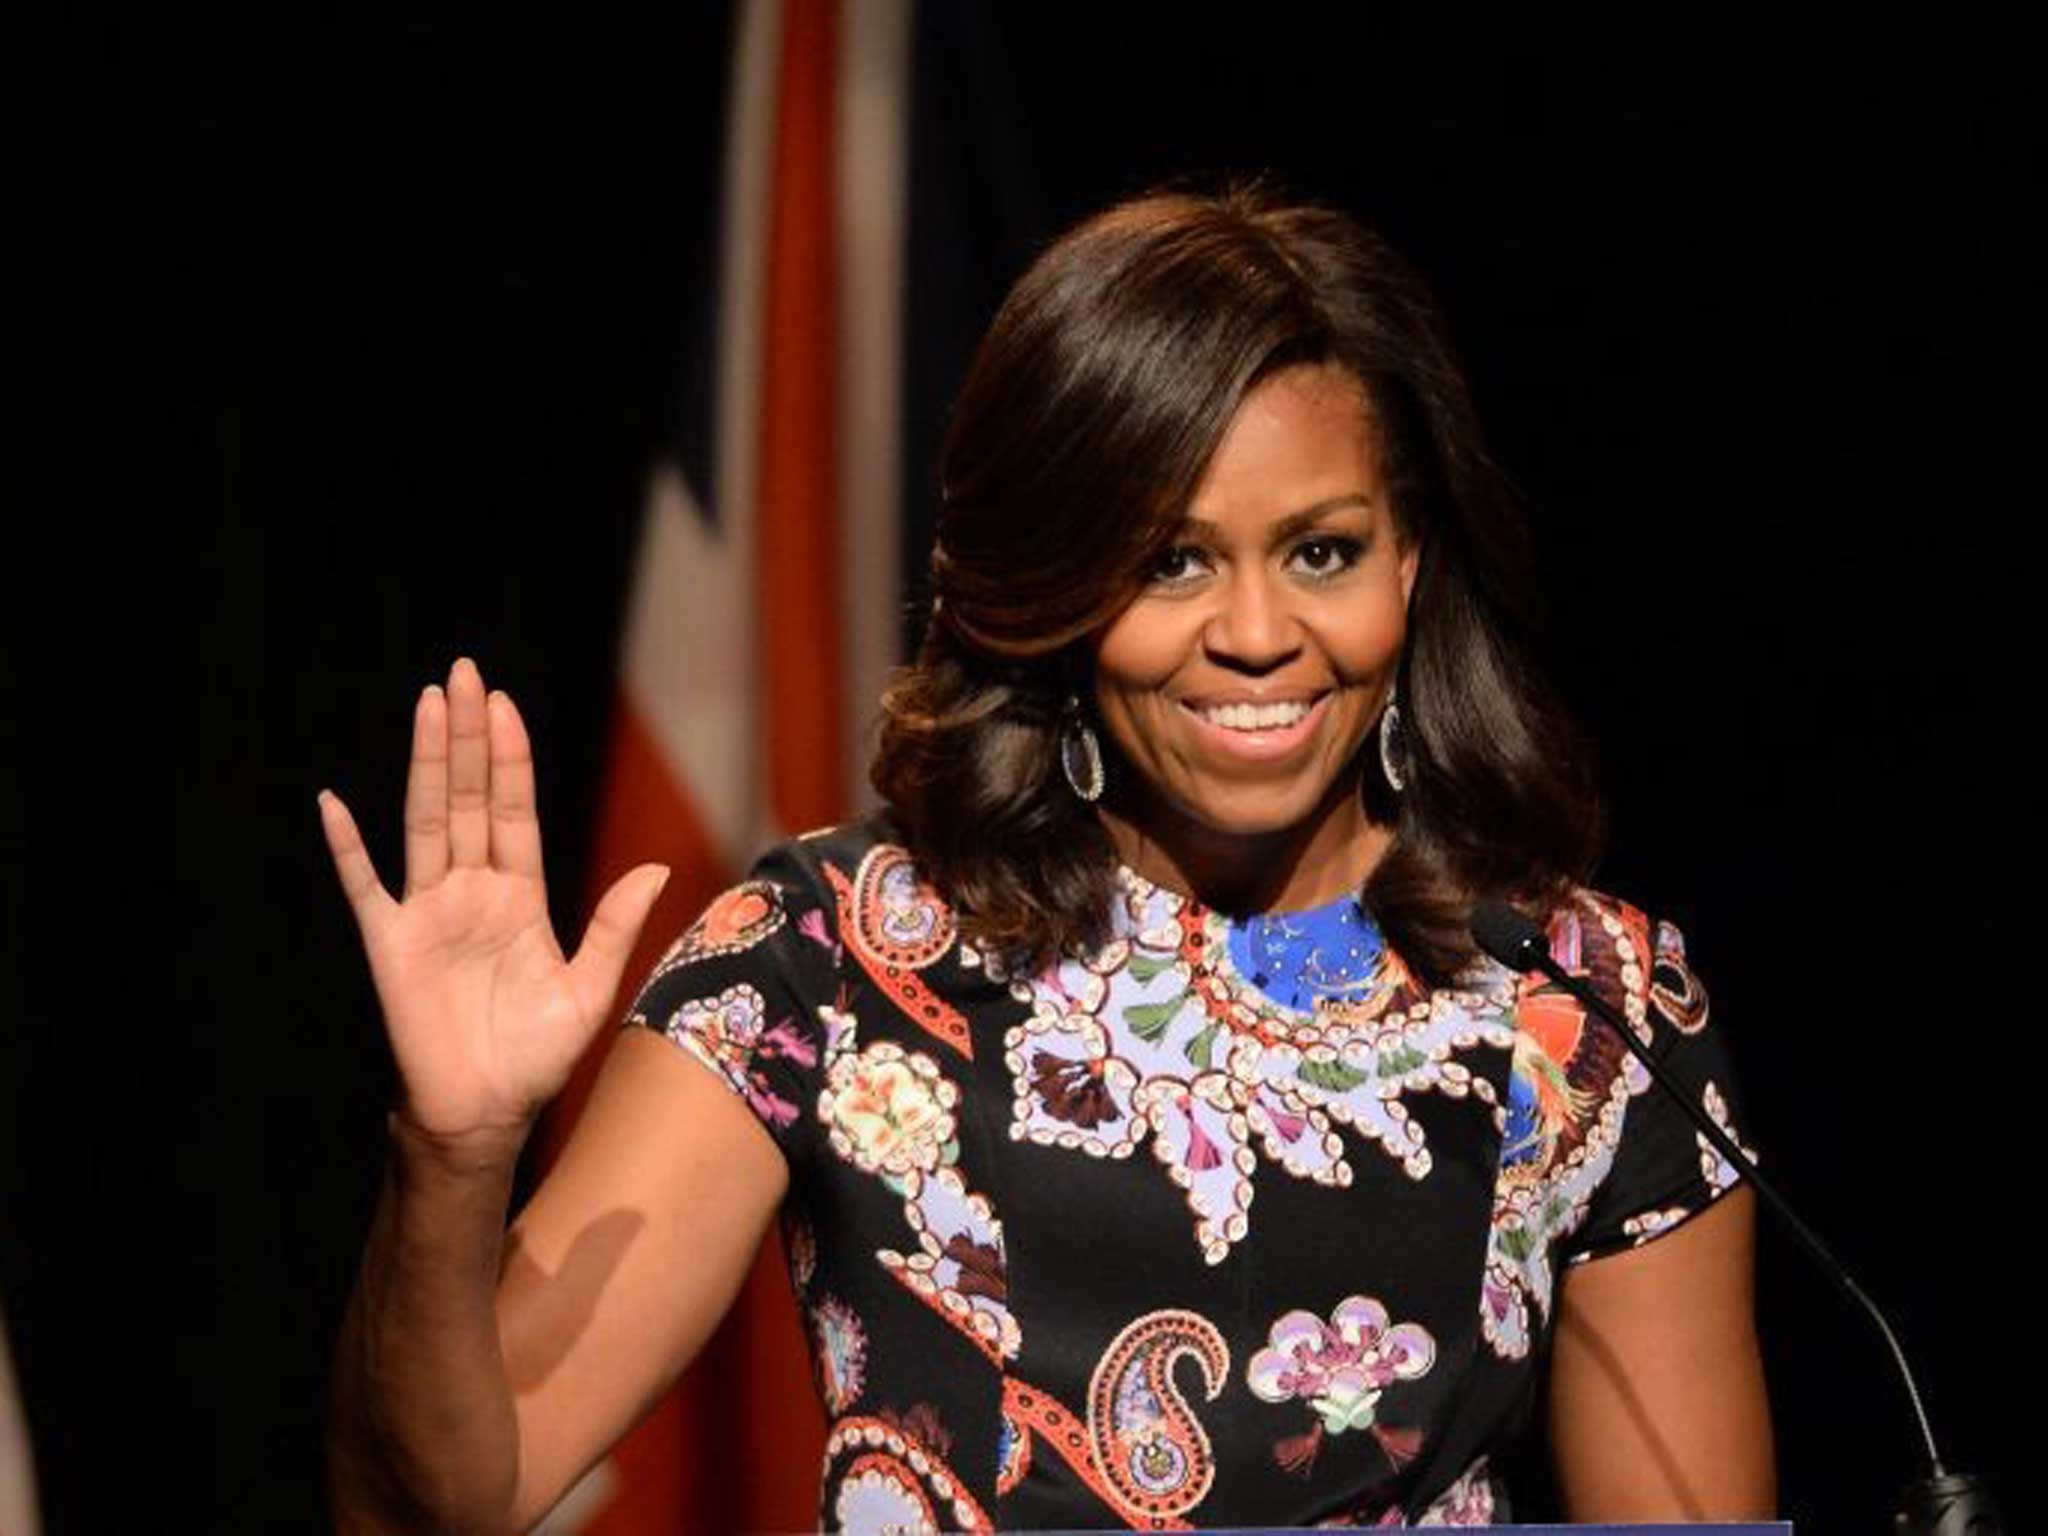 Michelle Obama is currently visiting the UK